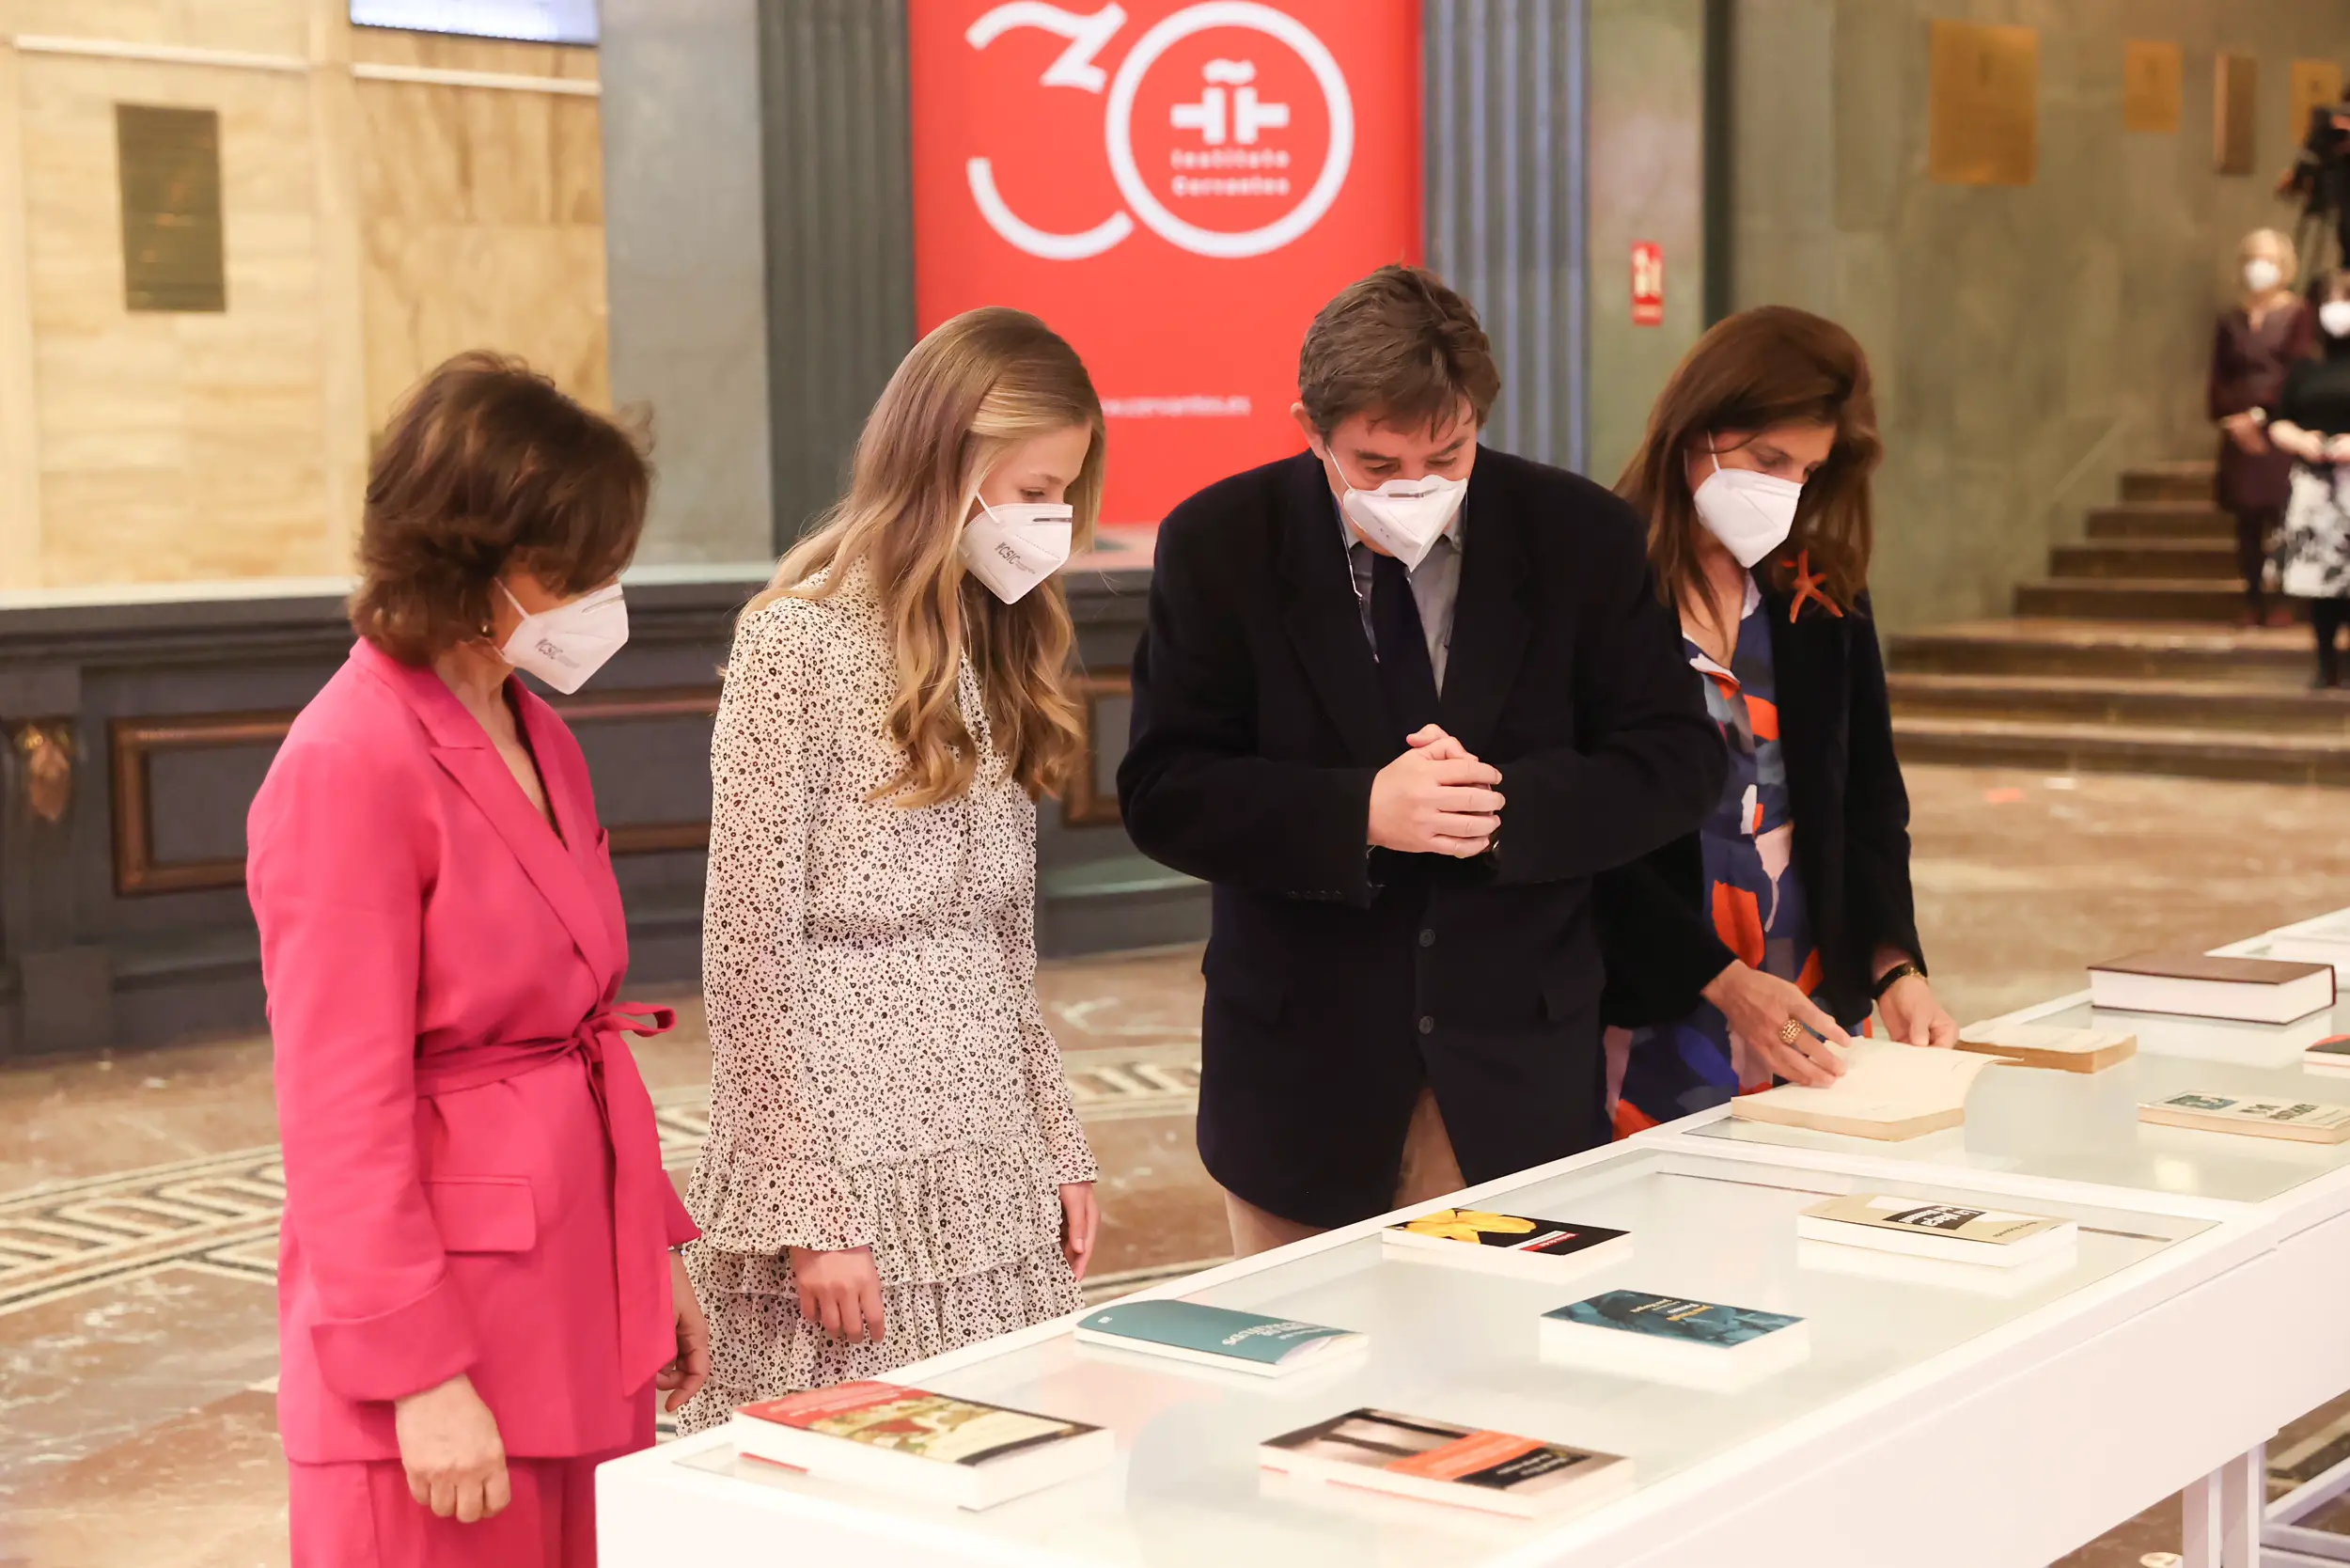 Princess Leonor with the Infanta Sofía, participated in the collective reading of Don Quixote in April 2020